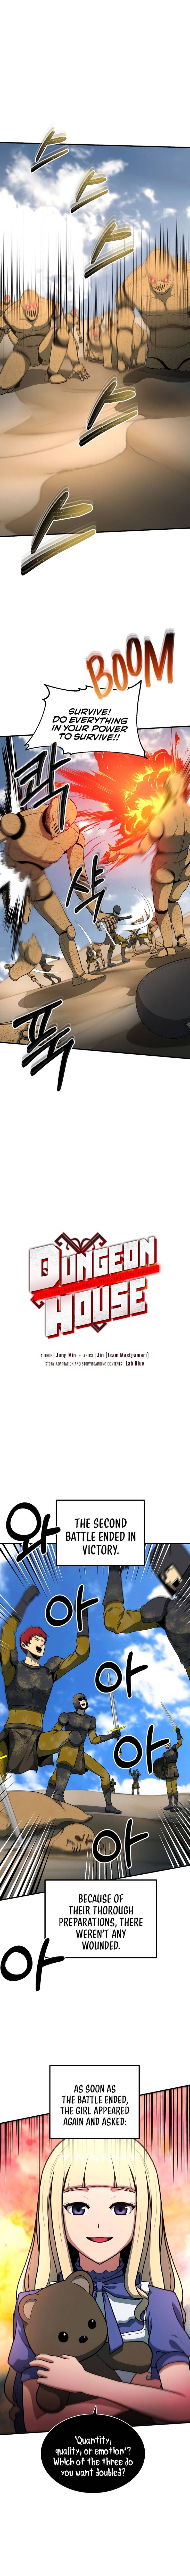 Dungeon House 49 1